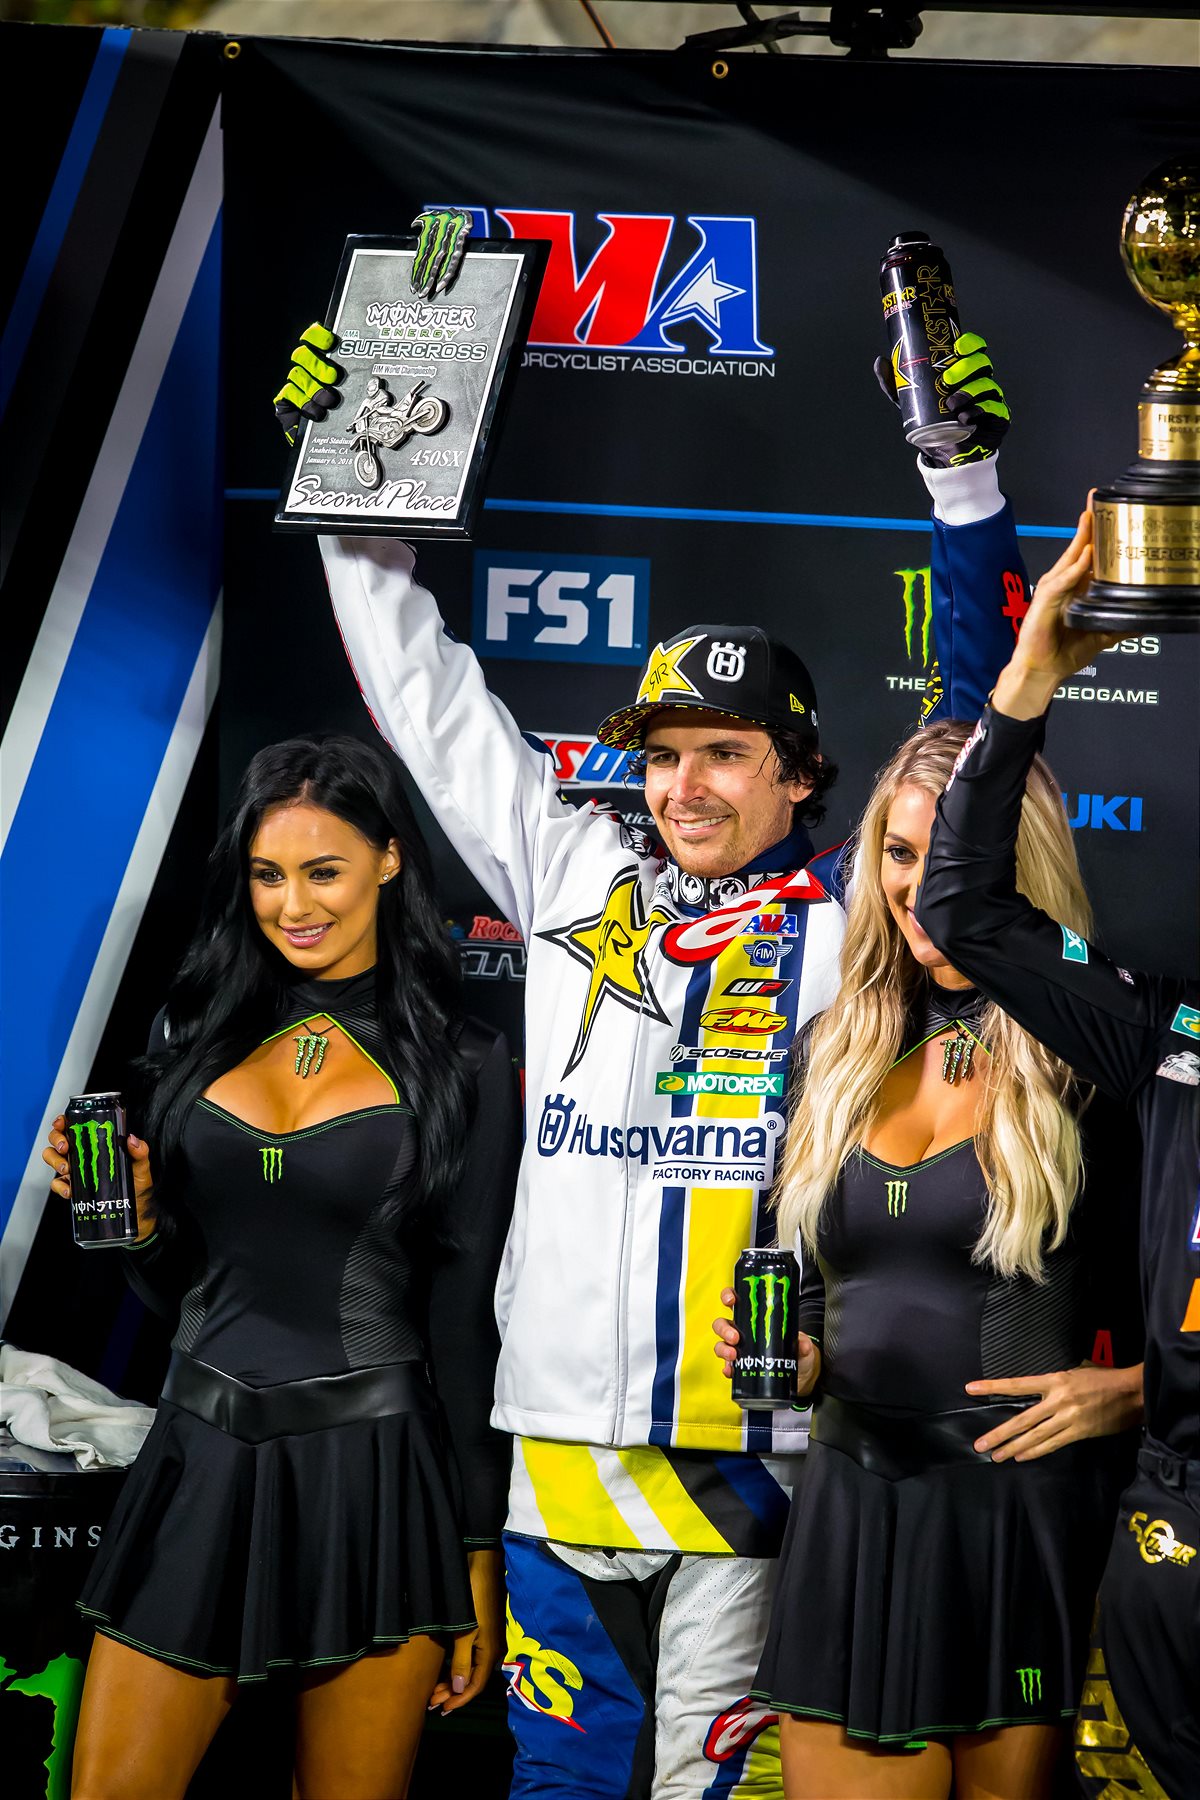 Jason Anderson claims second at Anaheim SX opener